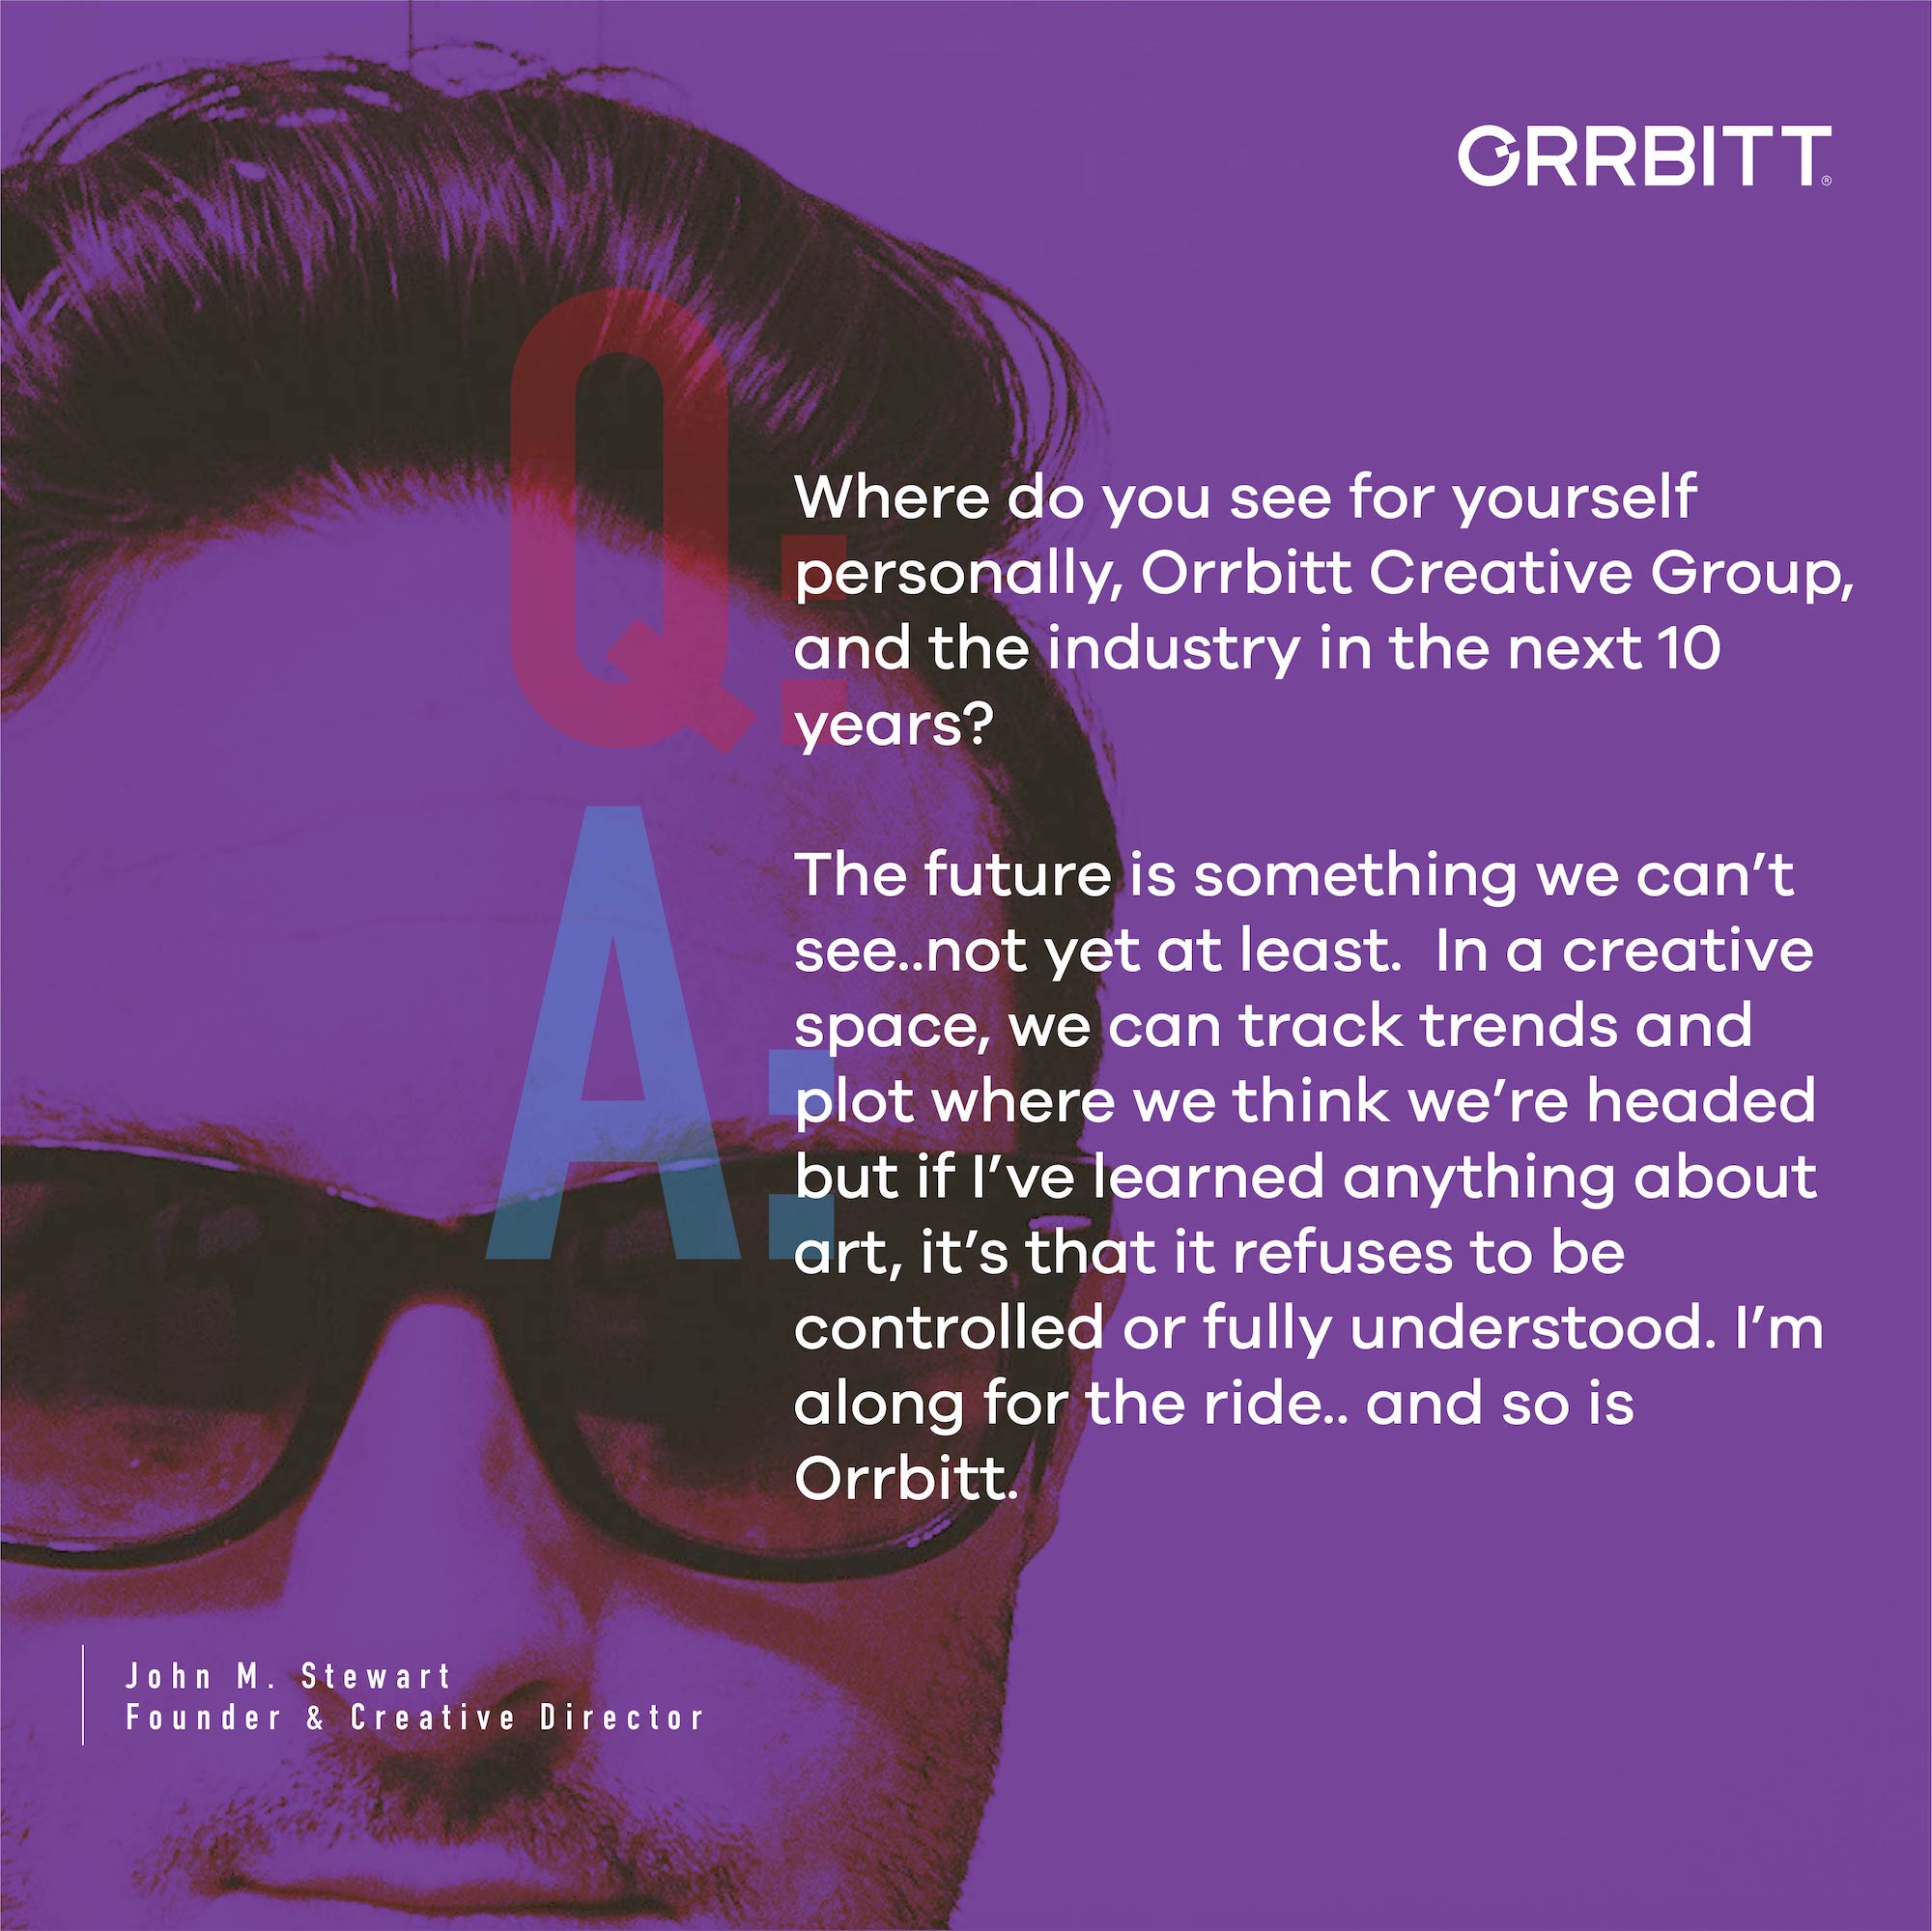 Photo of John Stewart, Founder & Creative Director at Orrbitt. Overlaid with Q & A included above.